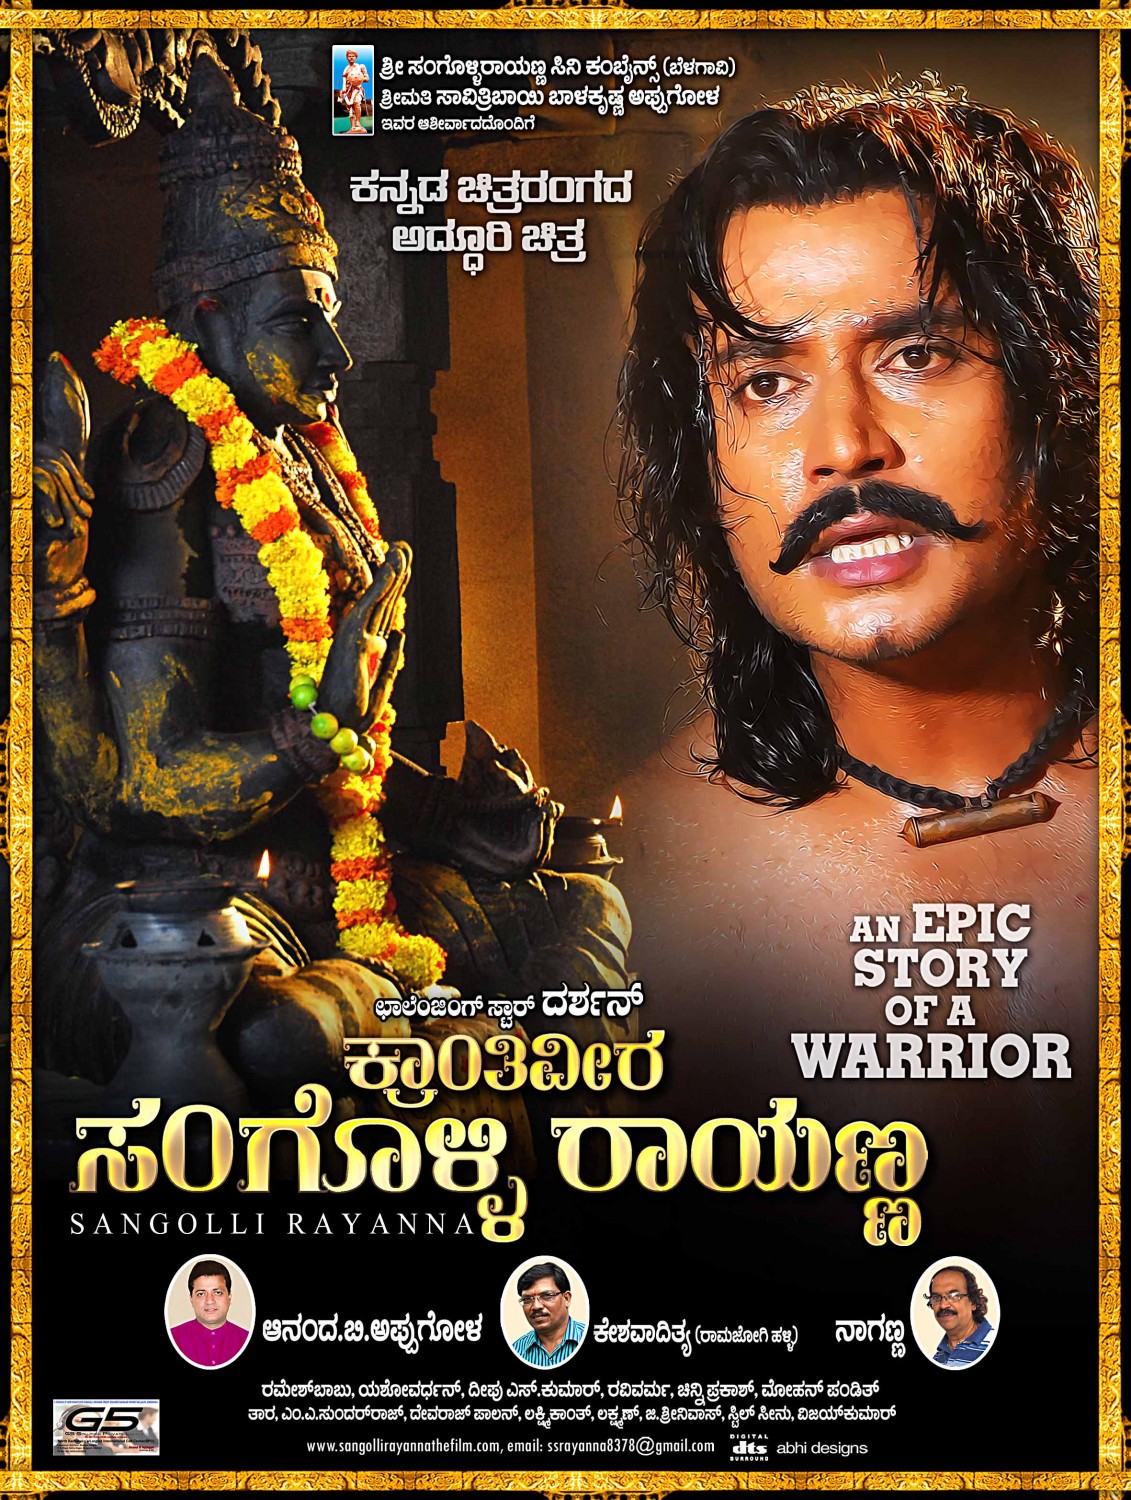 Extra Large Movie Poster Image for Sangolli Rayanna (#19 of 79)